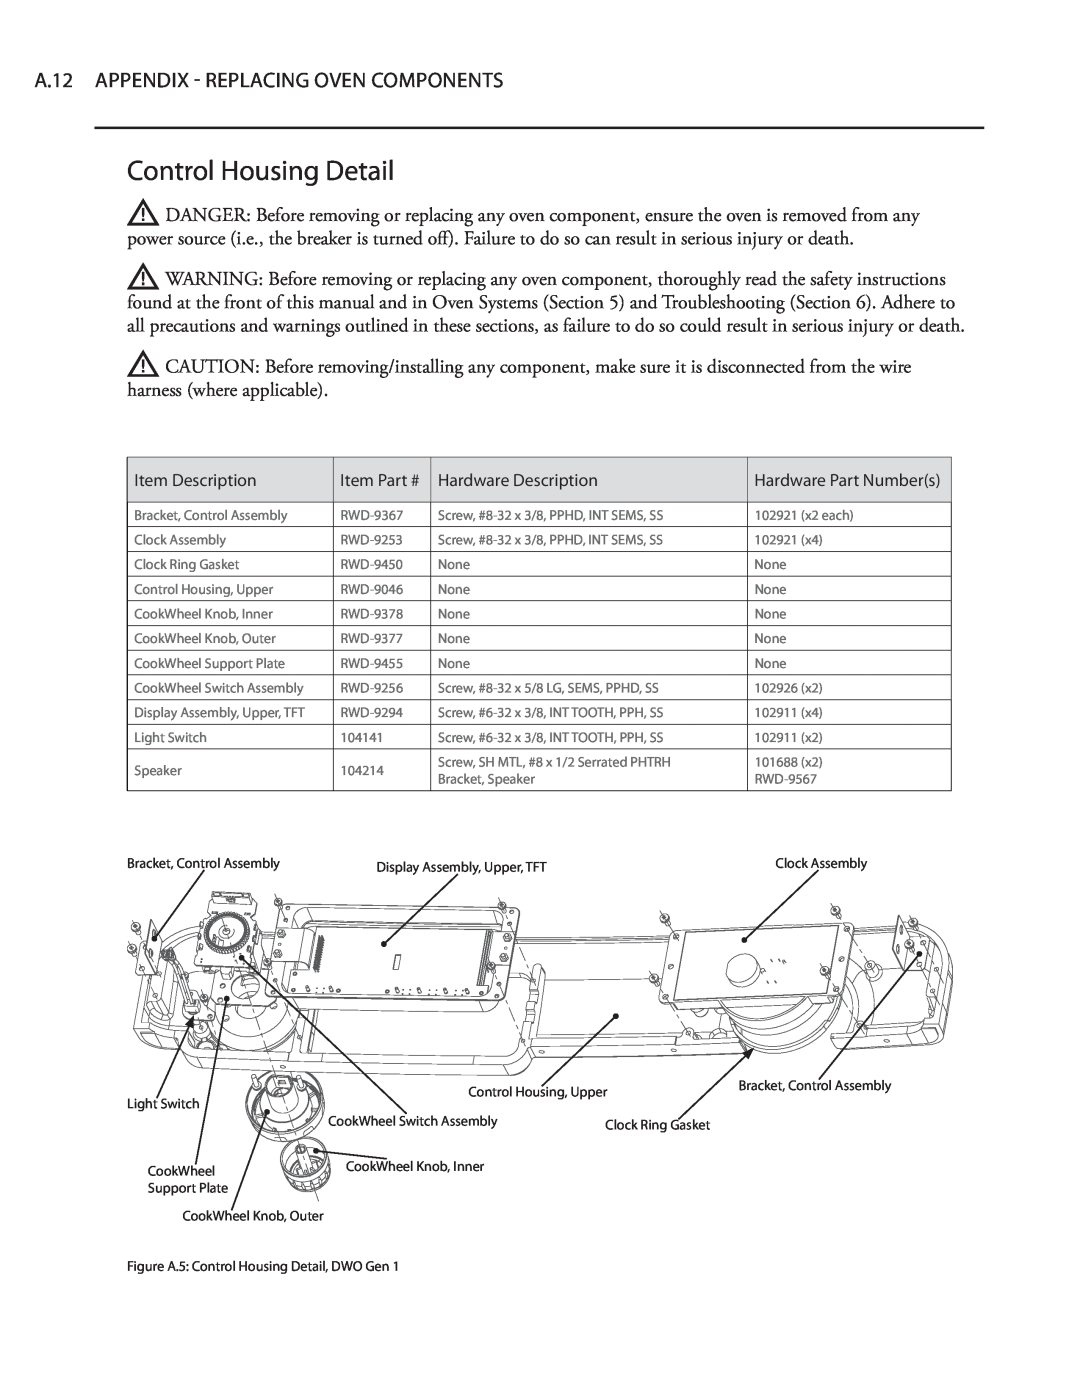 Turbo Chef Technologies Residential Single and Double Wall Oven service manual Control Housing Detail 